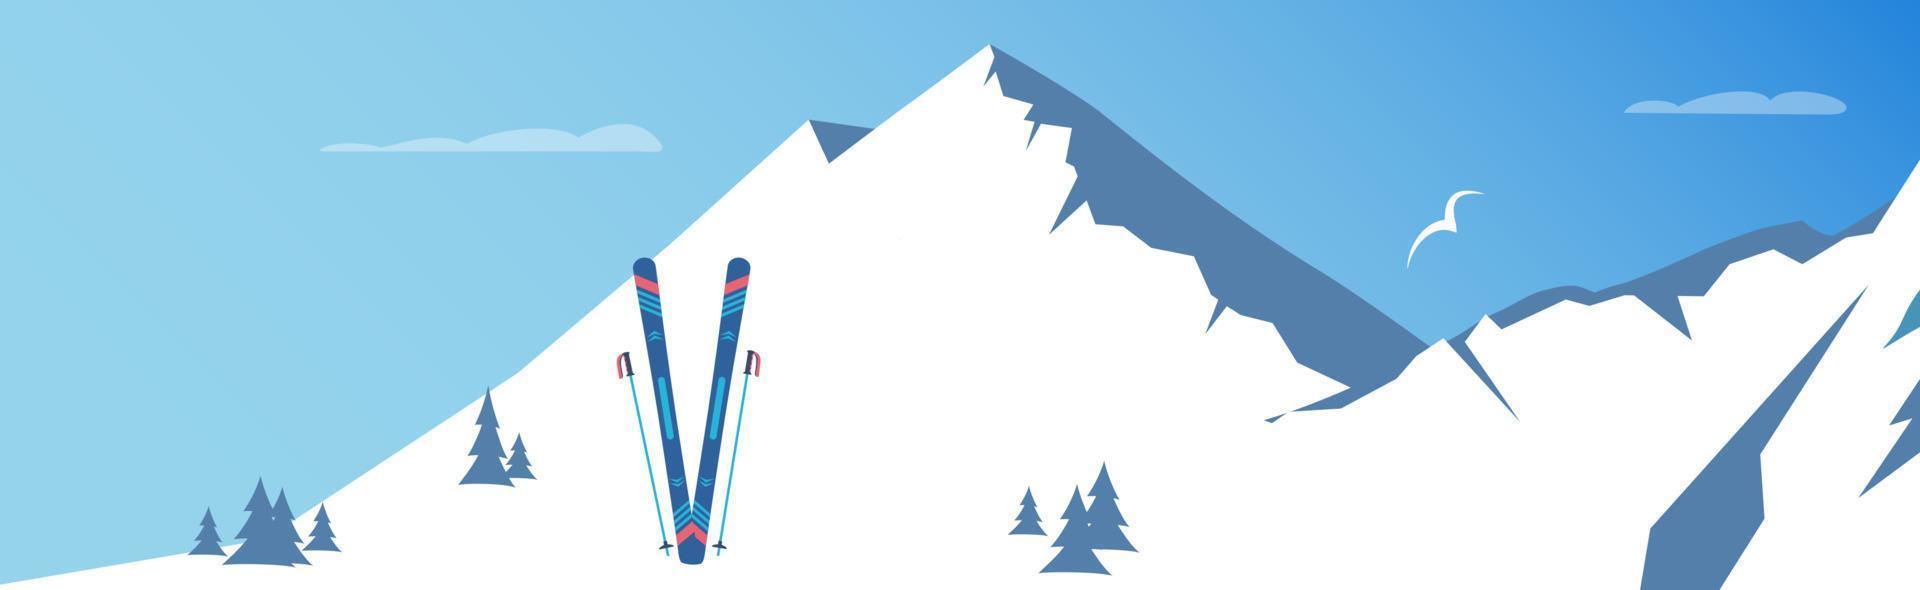 Skiing and snowy mountains. Winter Sport. Vector illustration.